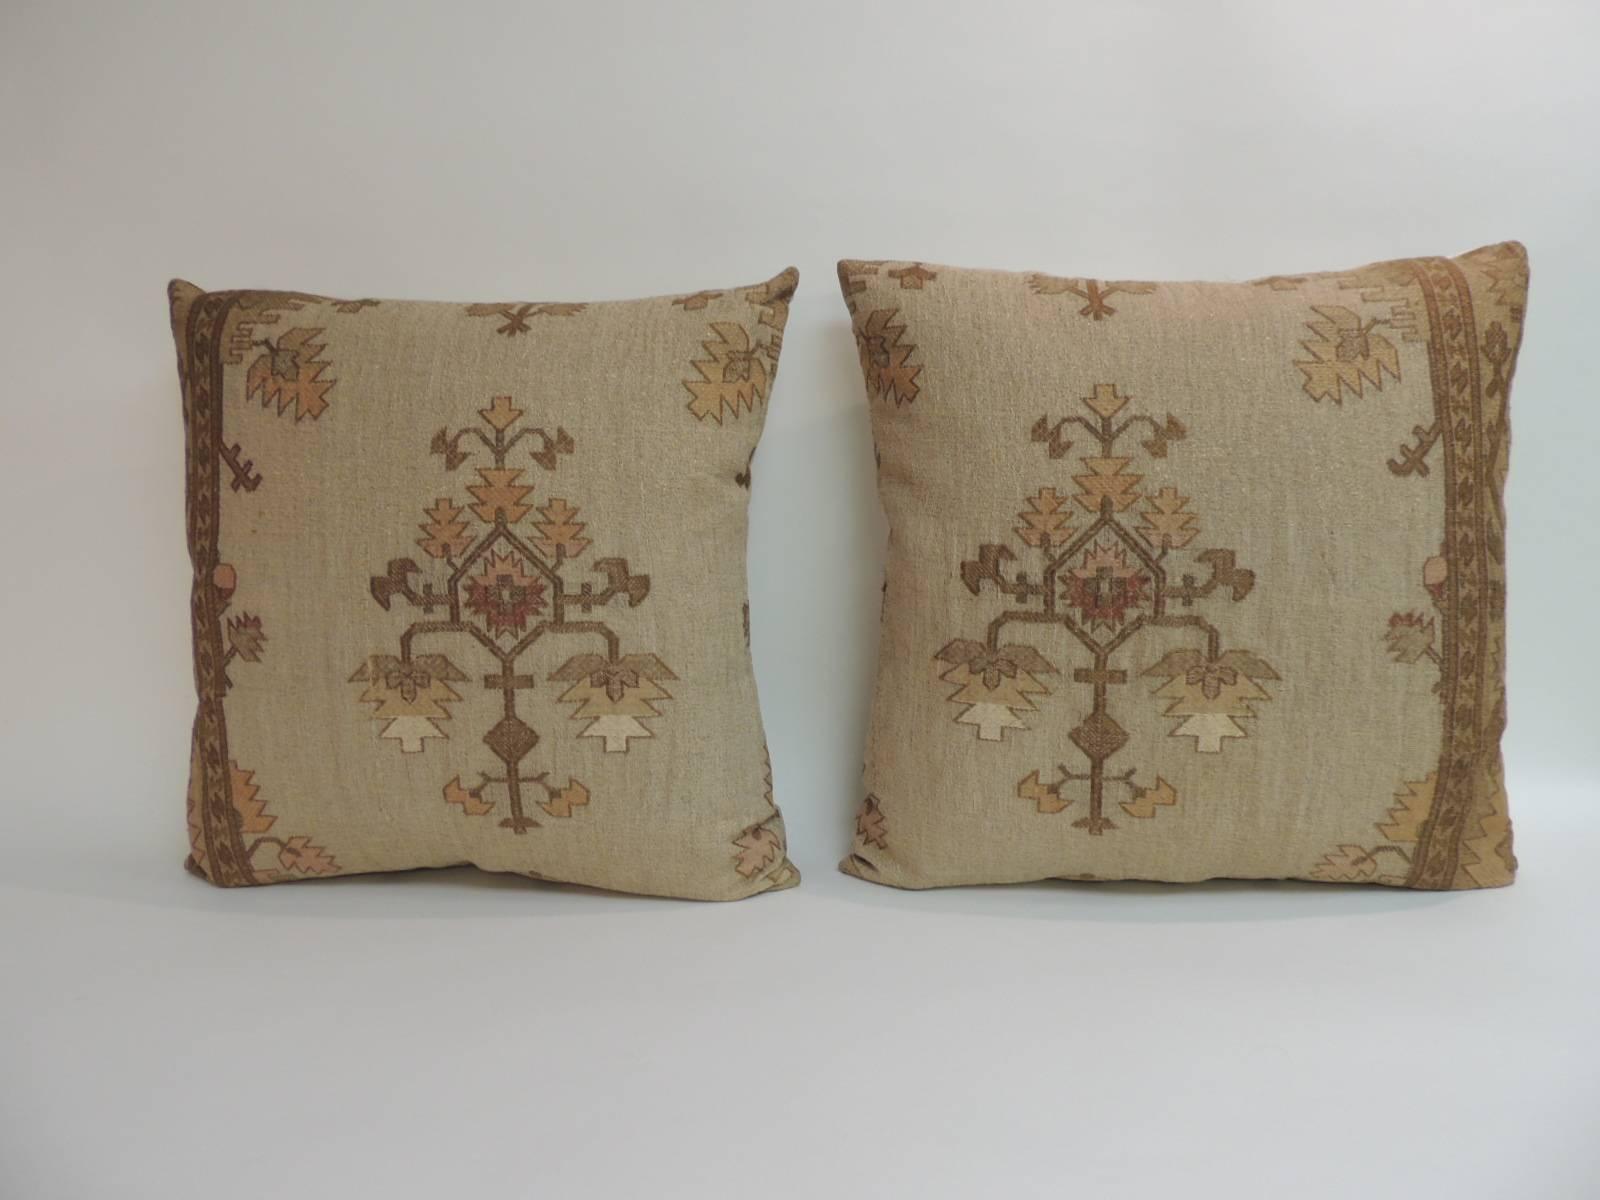 Pair of 19th century embroidered Turkish throw pillows geometric, gold metallic on silk 
undertones with embroidered flowers in pink, yellow, rust and orange with a silver/grey silk backings.
Handcrafted and designed in the USA with custom made